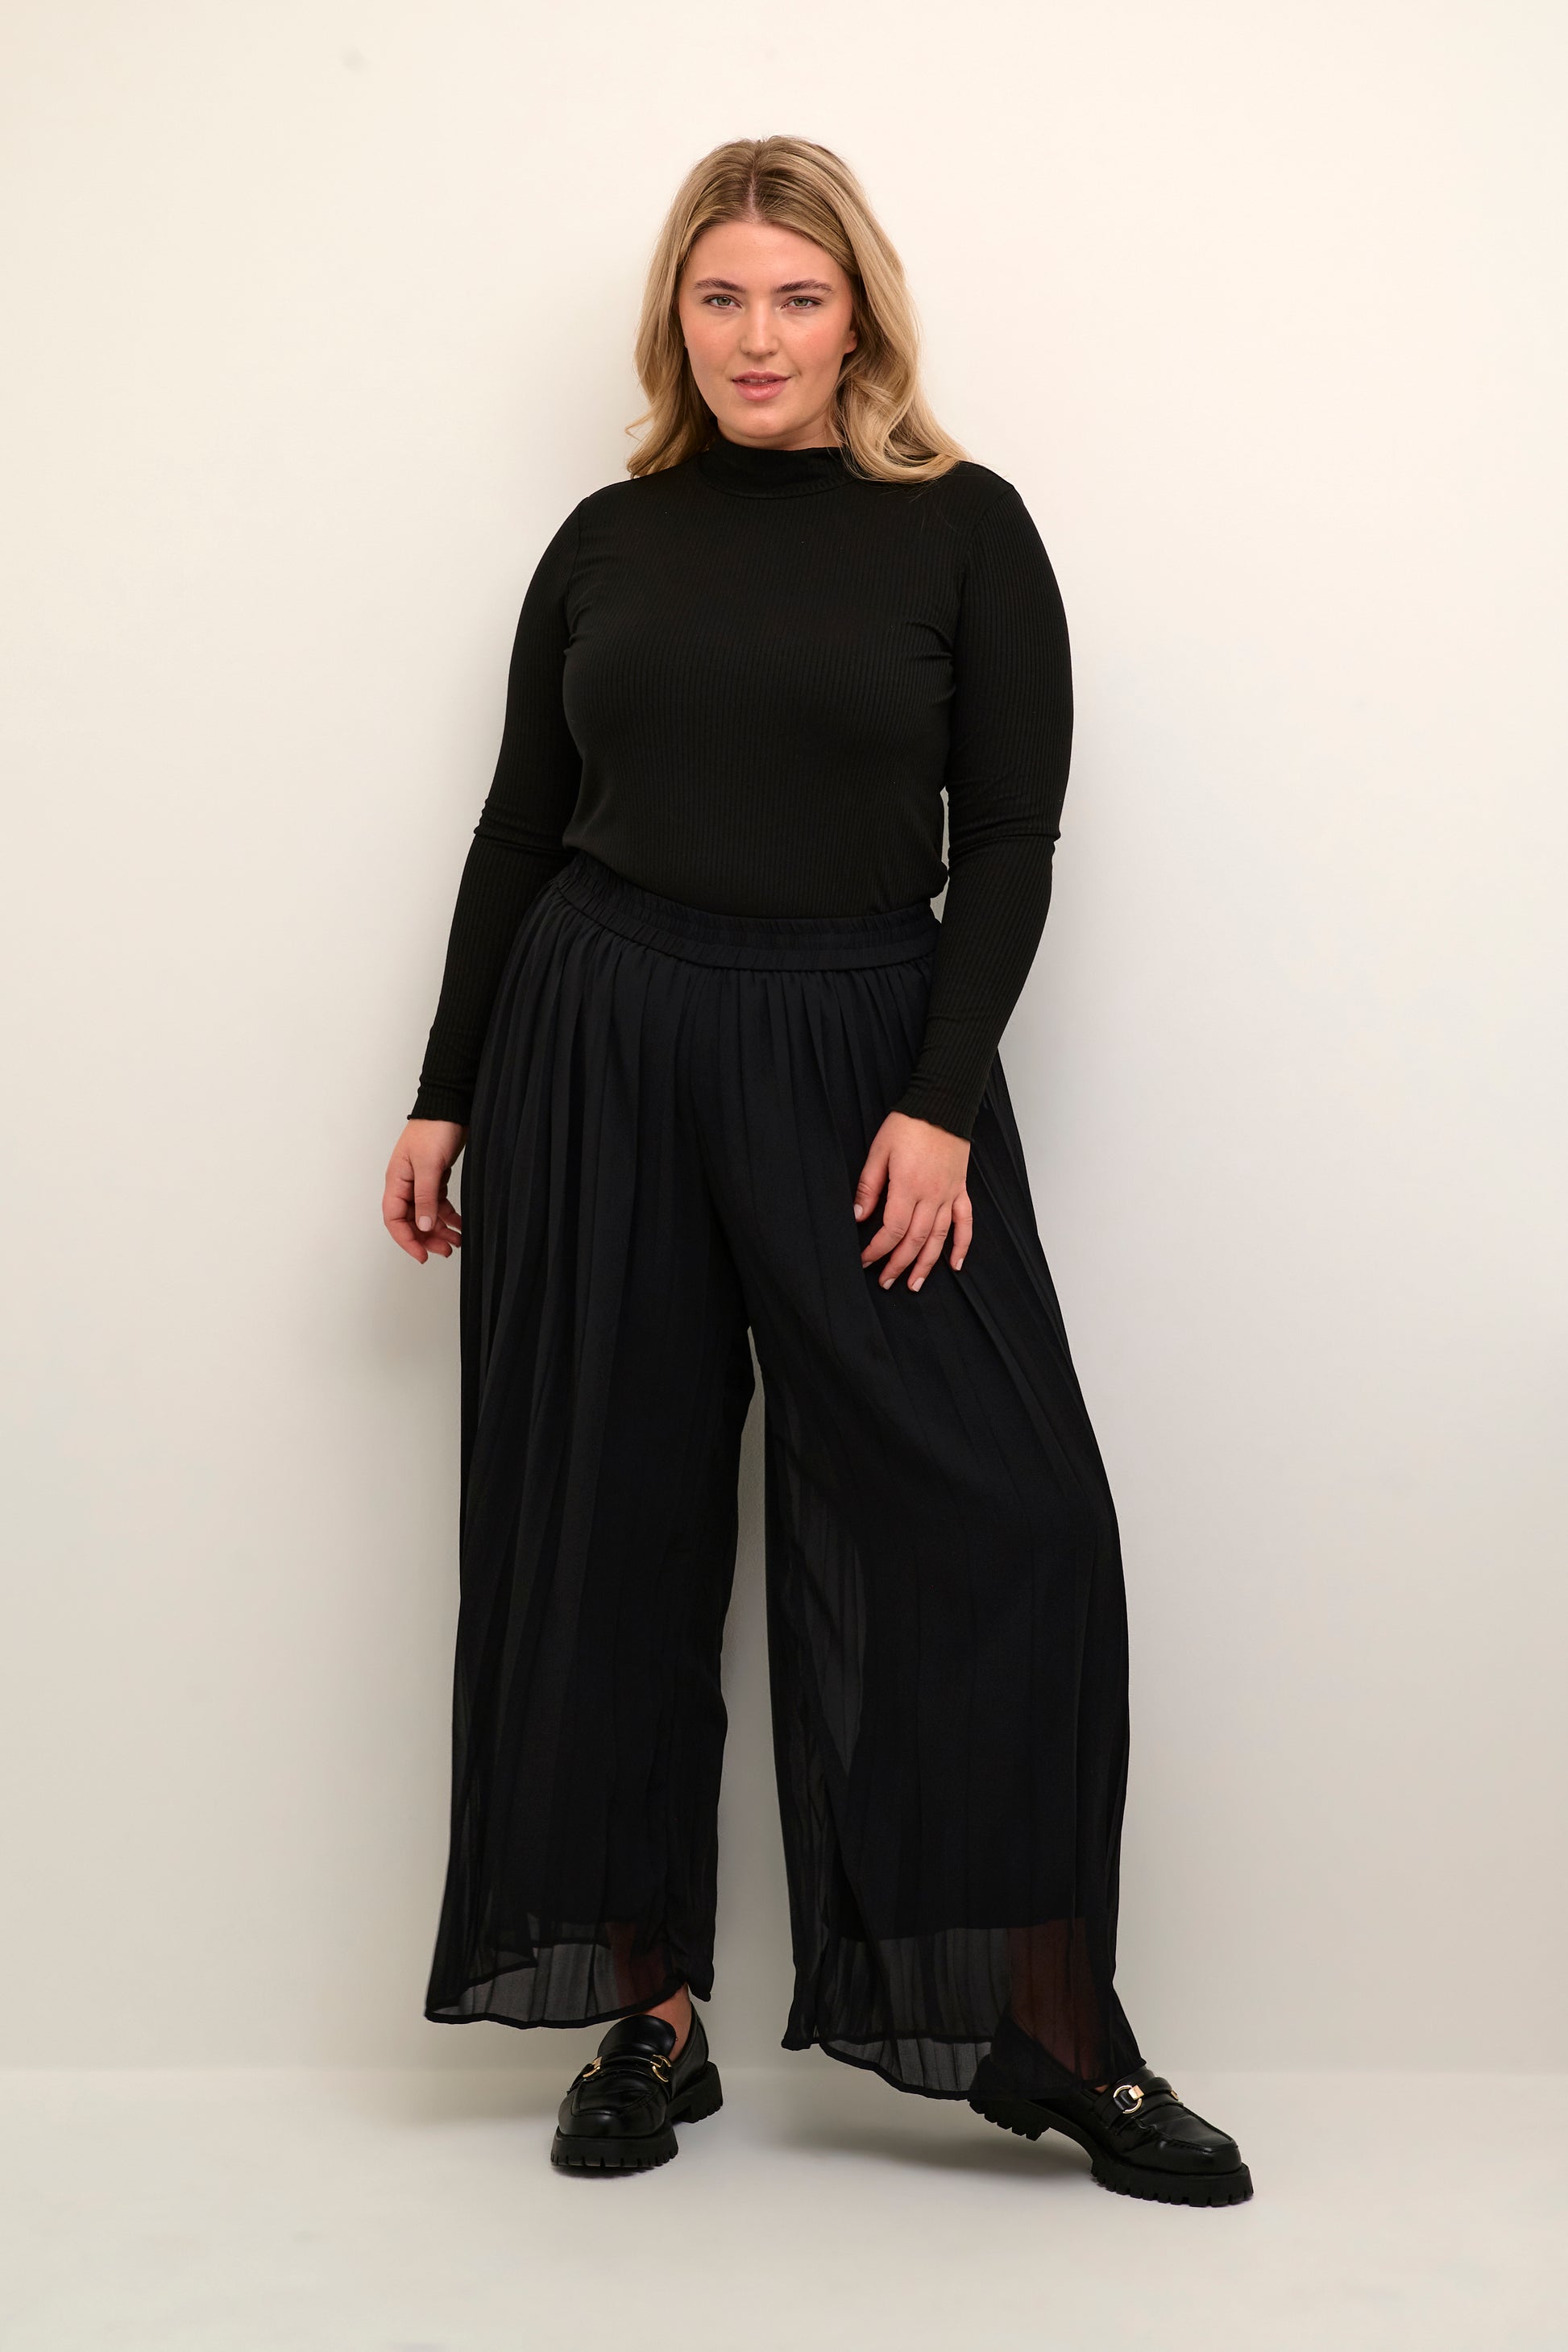 Model wearing Kaffe Curve KCferi black pleated wide leg pant. Available at Pinned Up Bra Lounge in Markham, Ontario